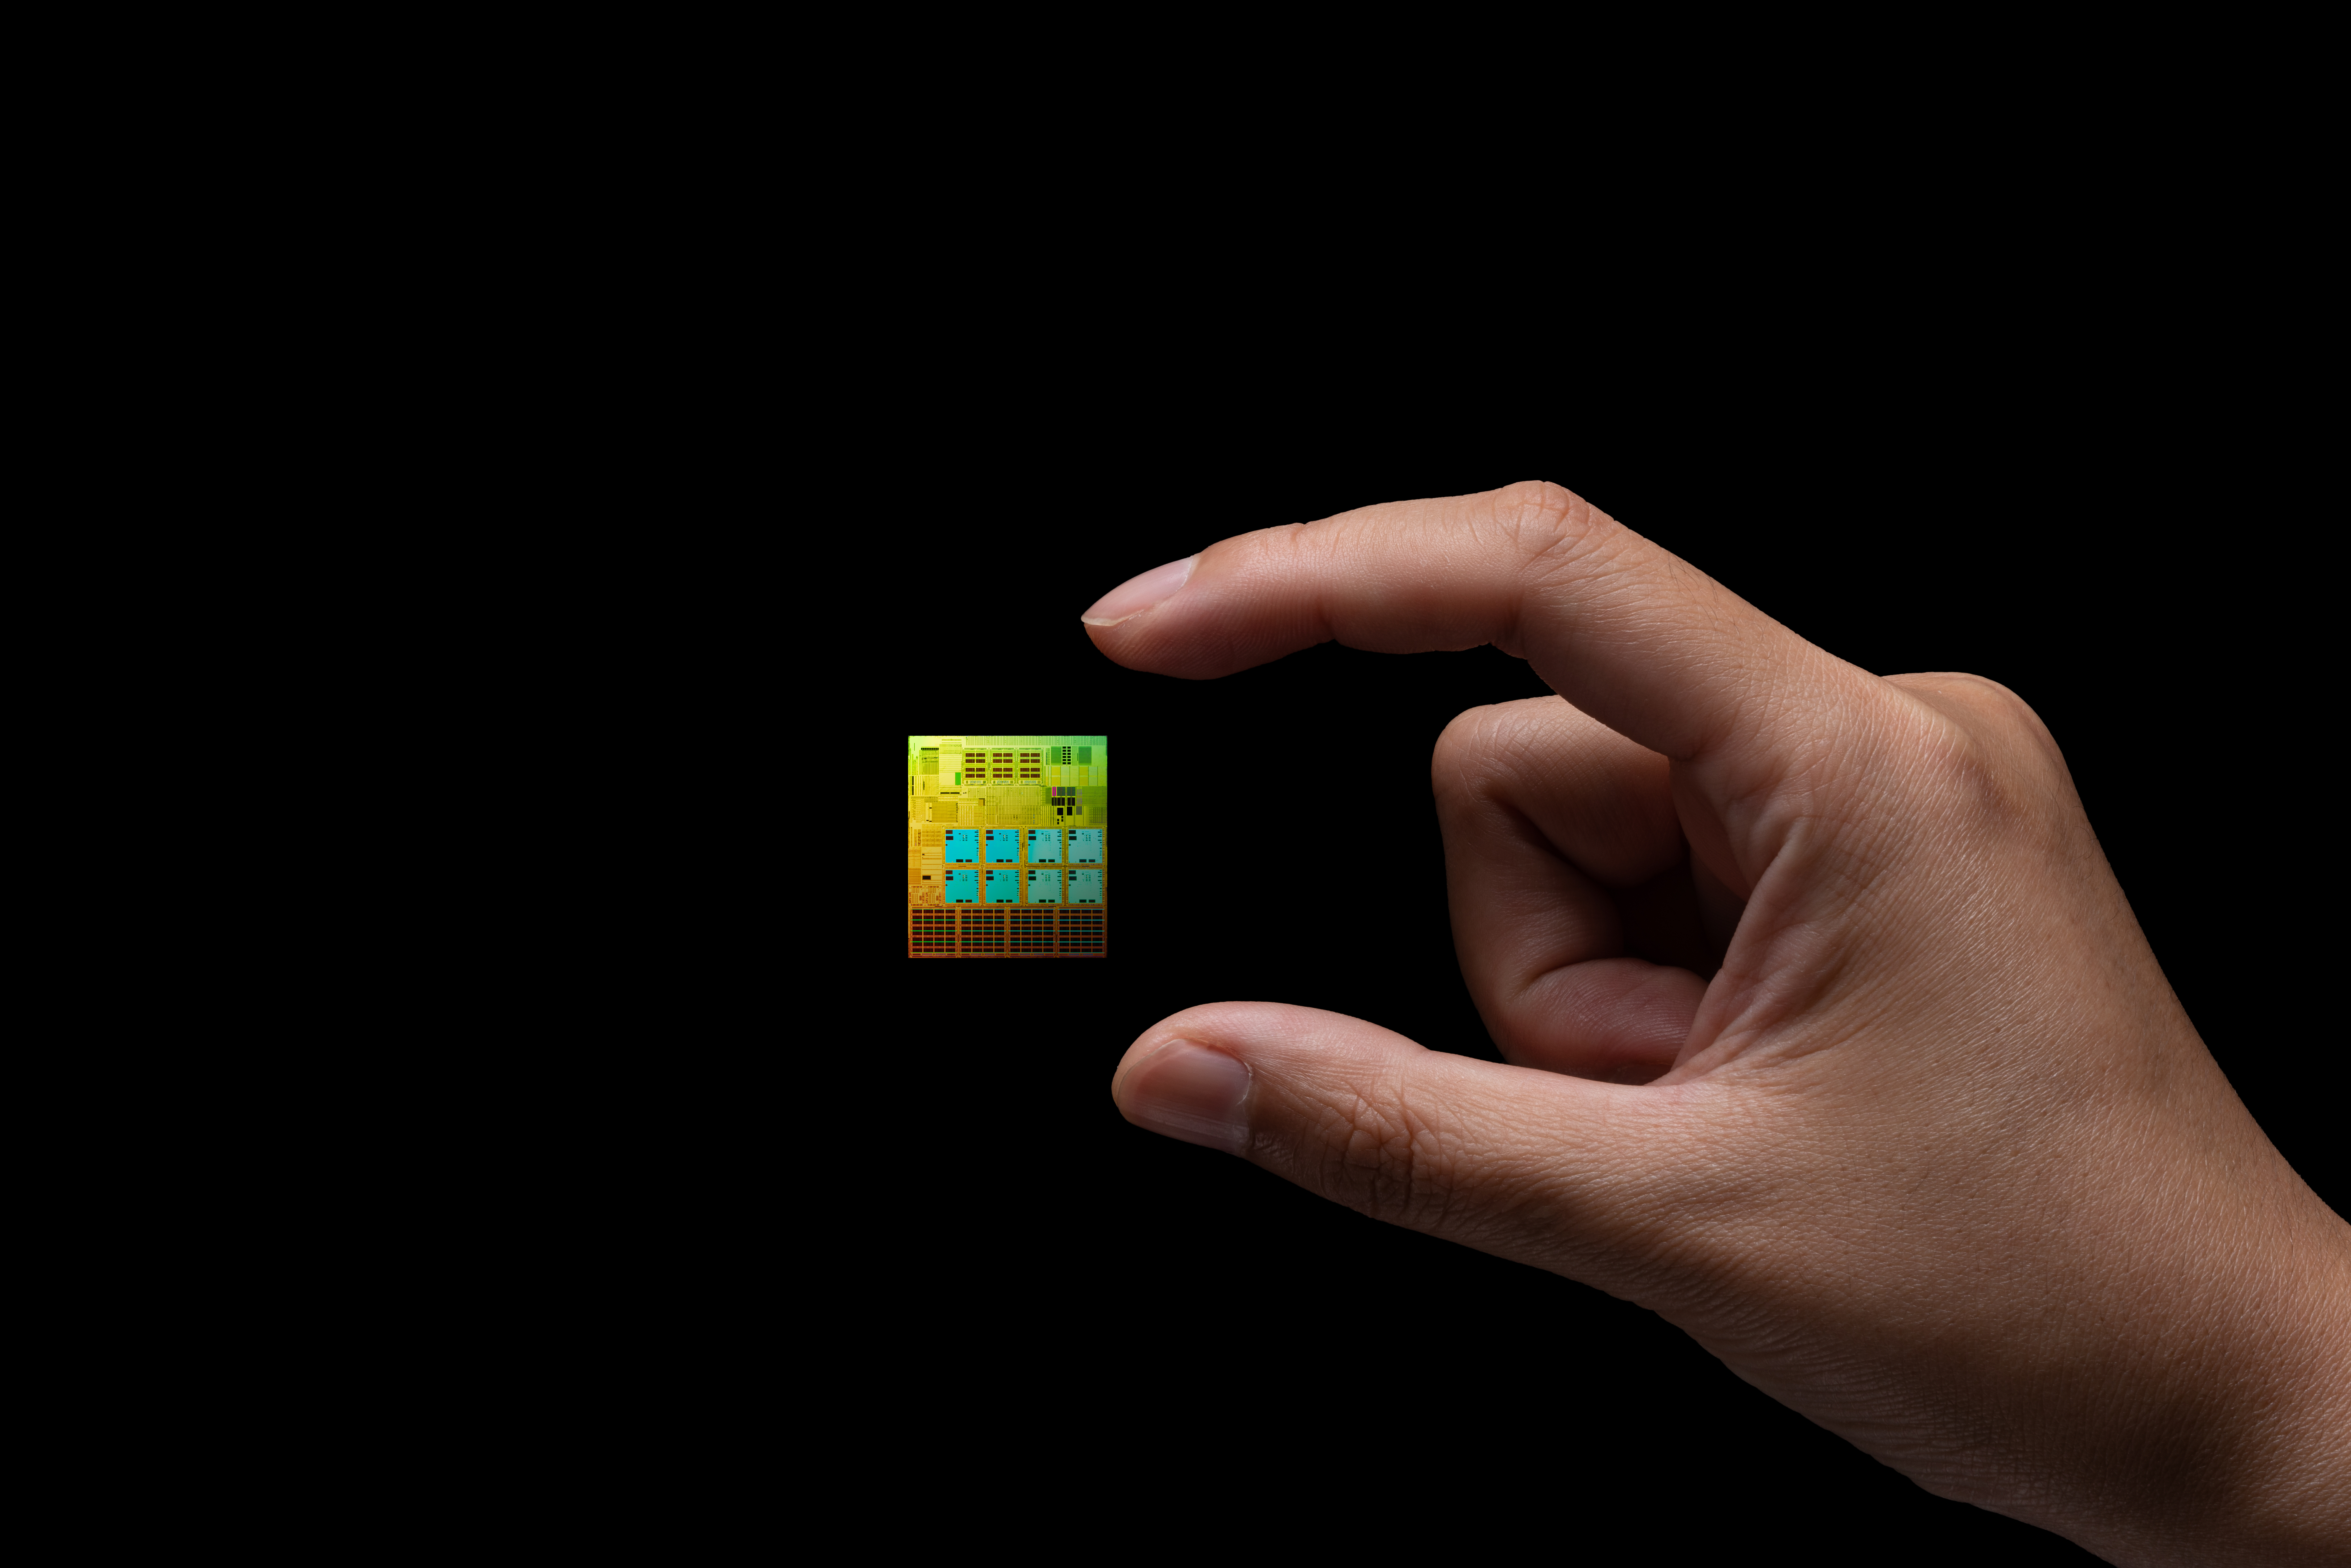 Image of a semiconductor levitating between two fingers on a black background.